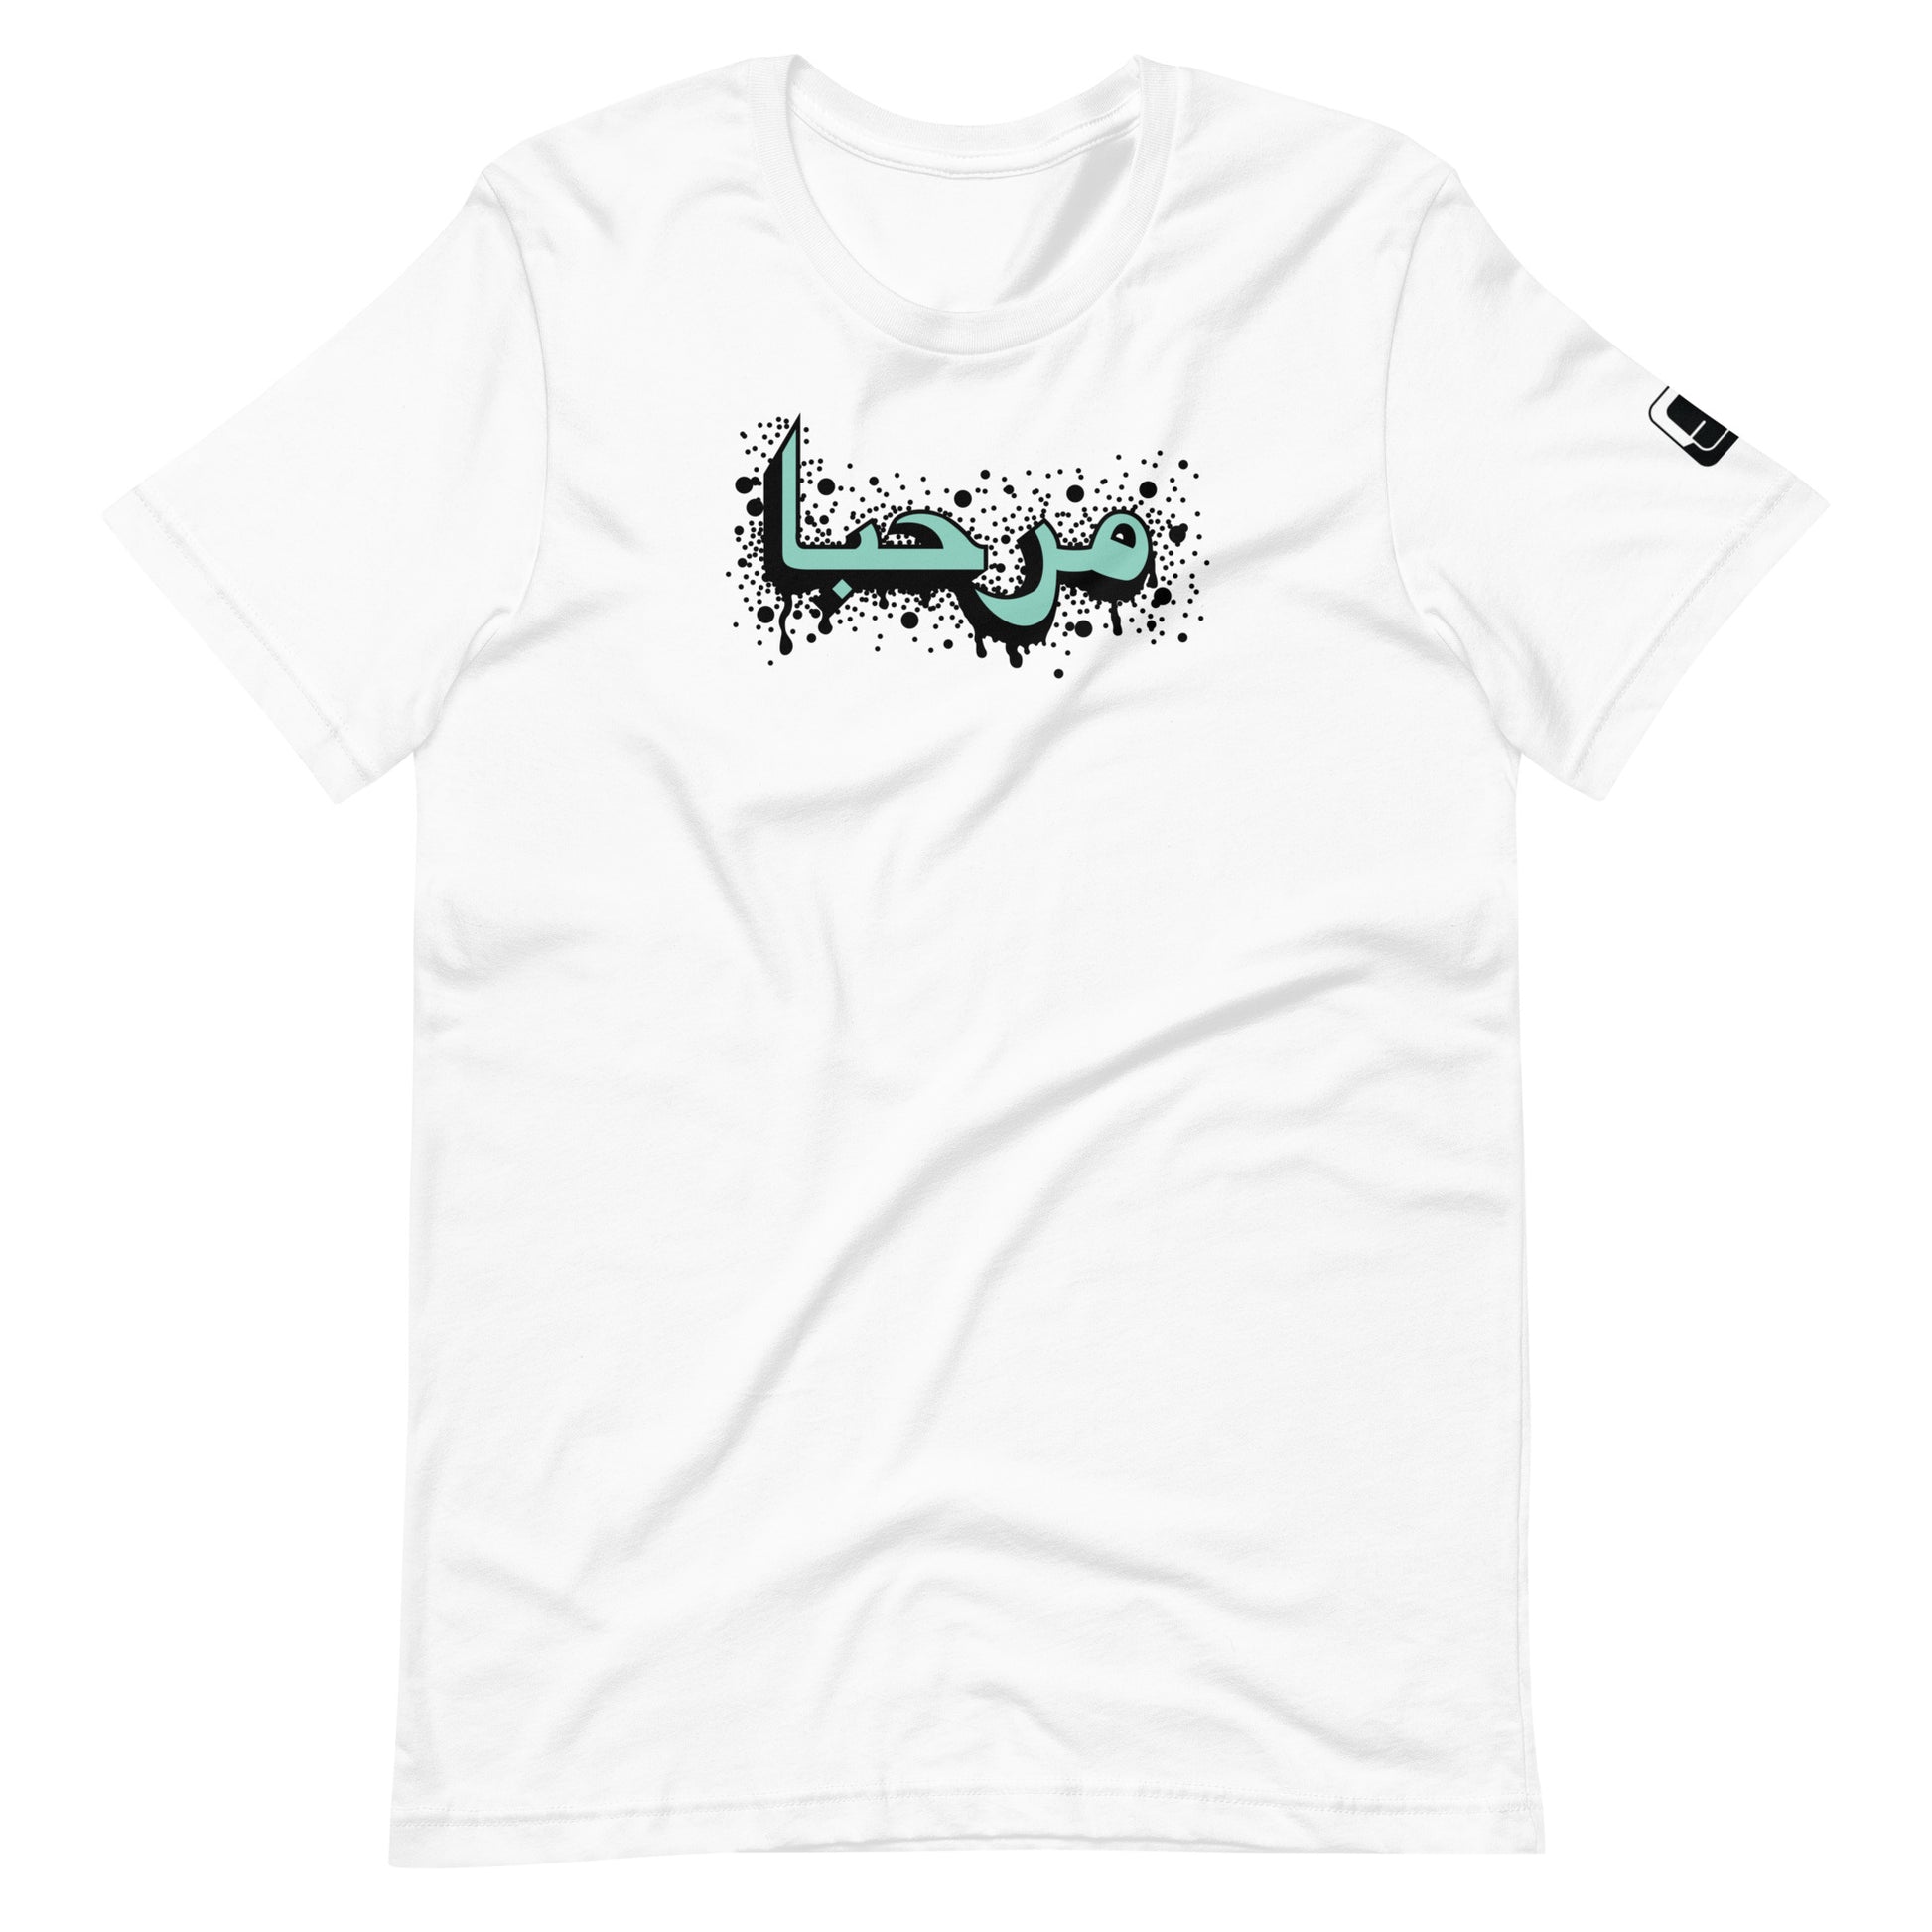 White t-shirt featuring central turquoise Arabic calligraphy with black shadow and scattered ink dots, accompanied by a small black logo patch on the sleeve, displayed against a white background.